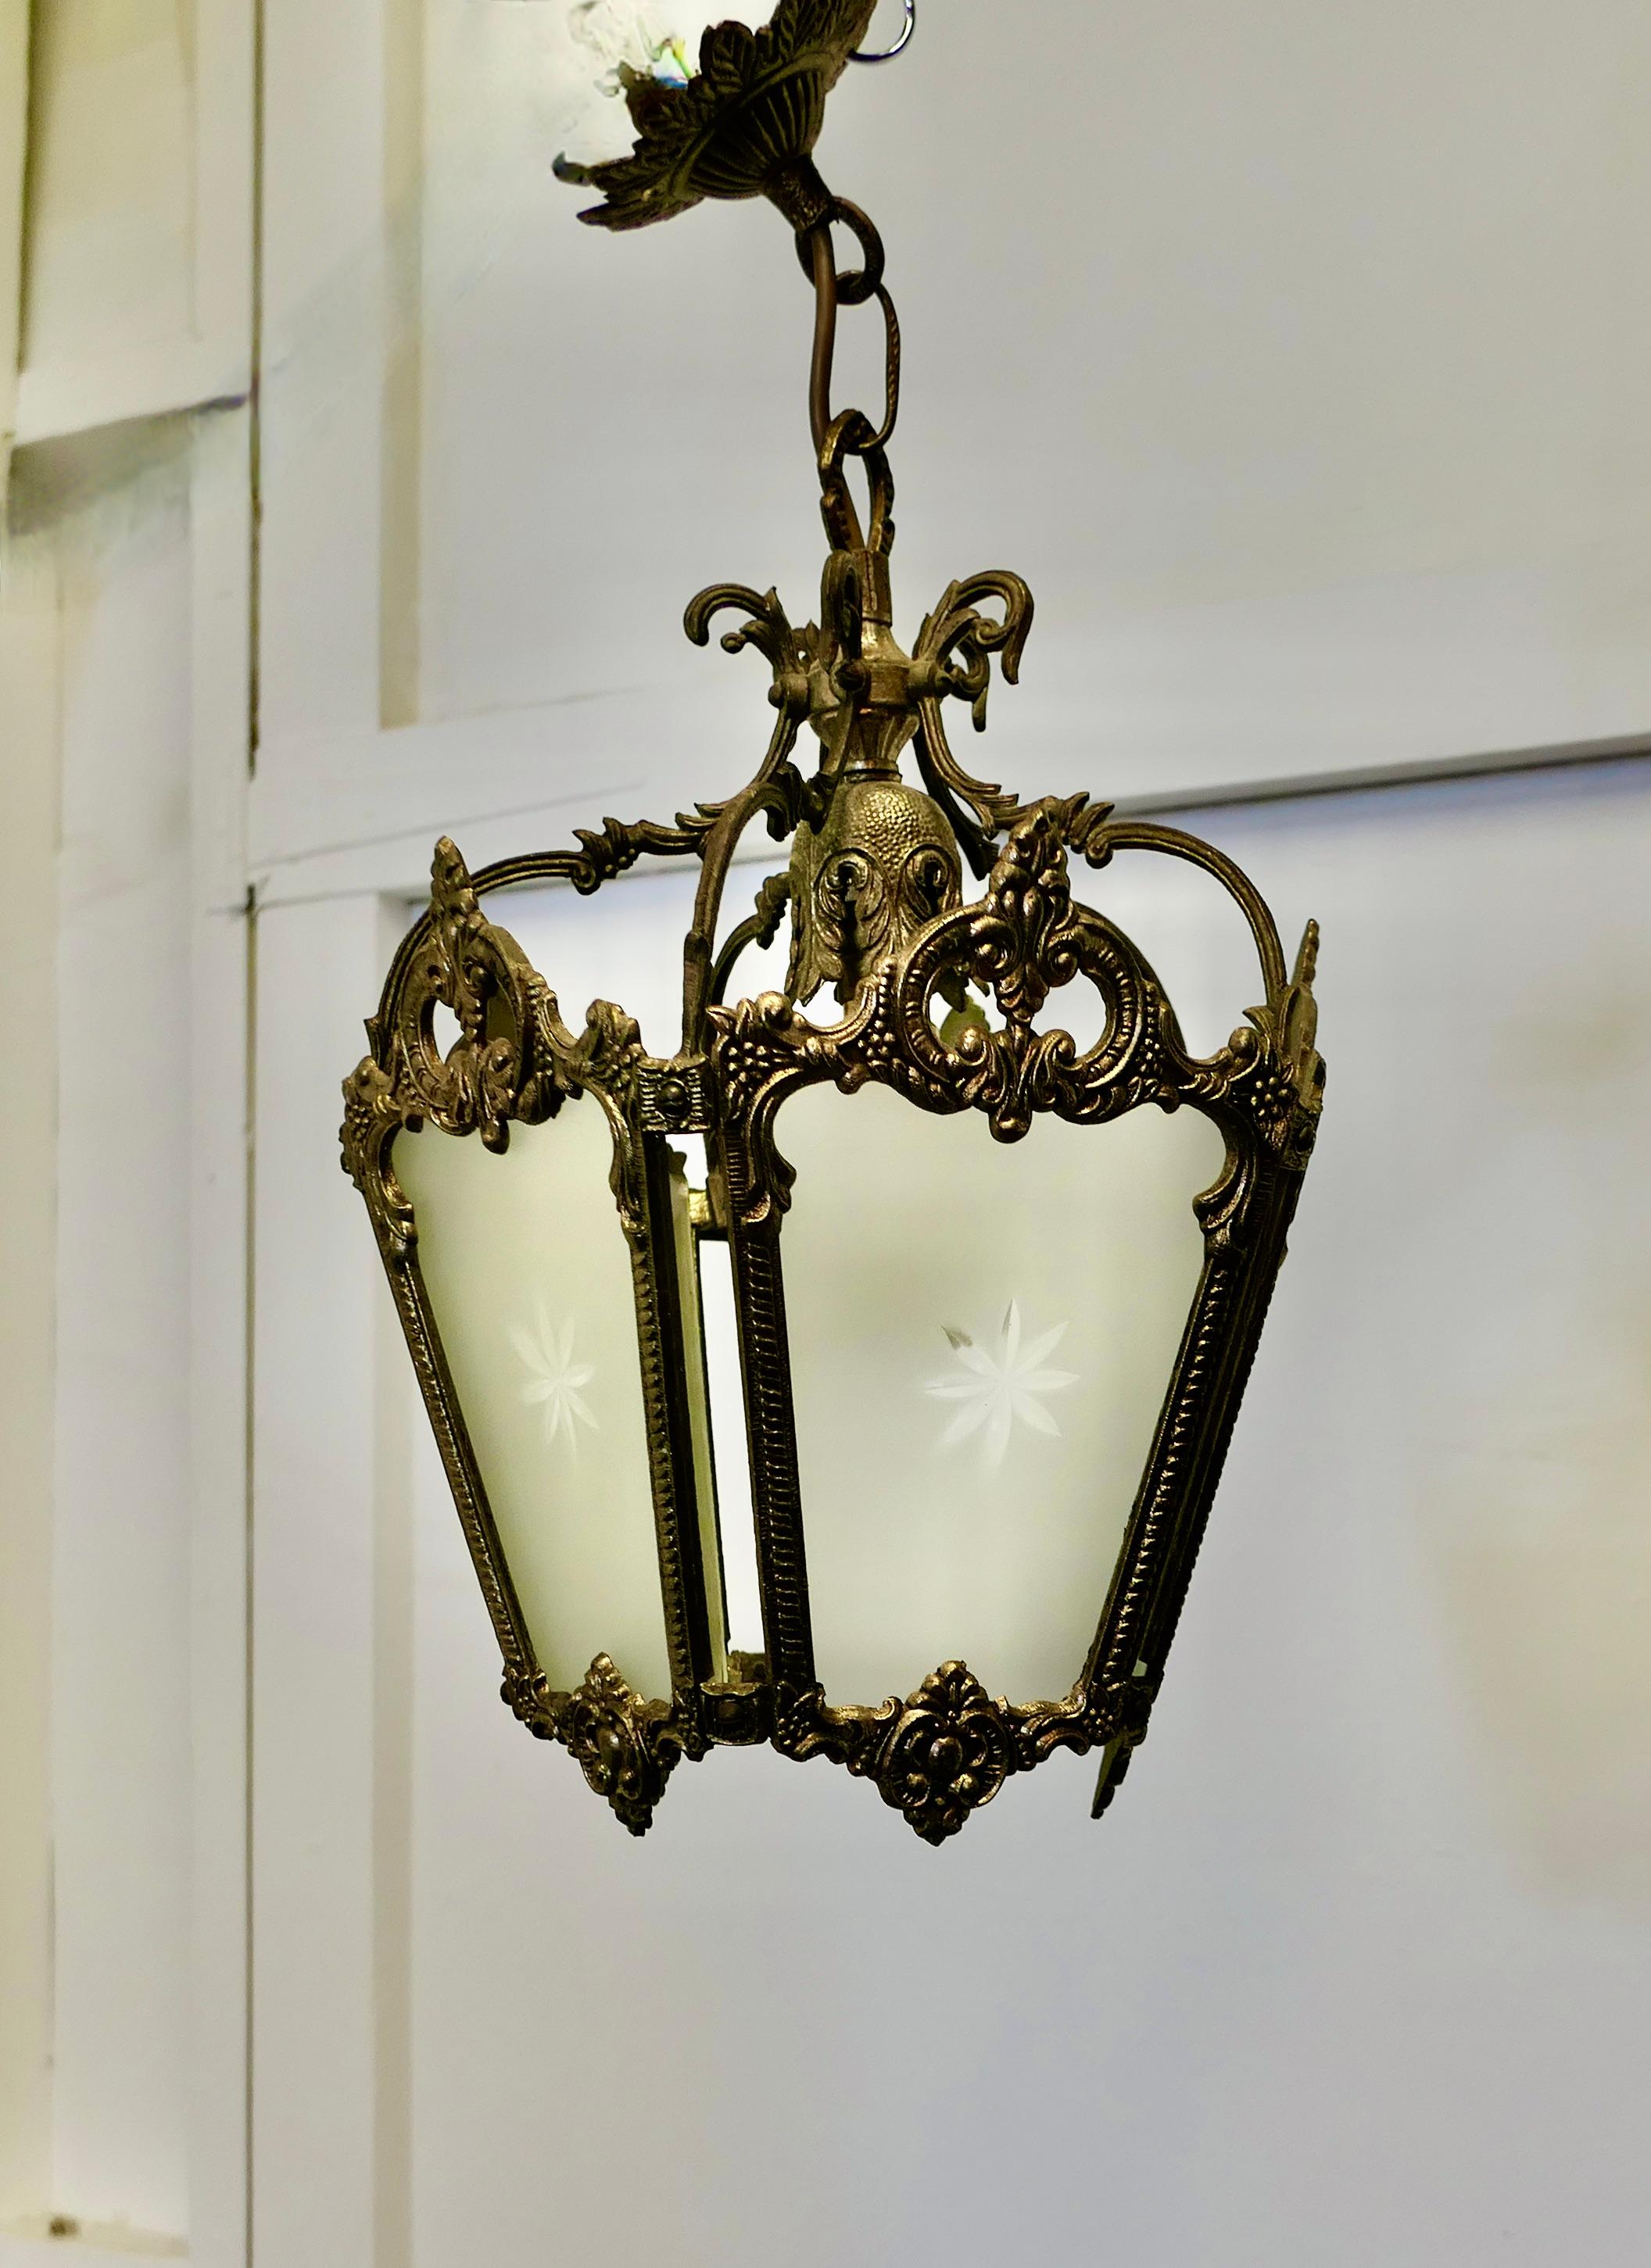 Decorative French Gilt Brass Lantern Pendant Light    In Good Condition For Sale In Chillerton, Isle of Wight